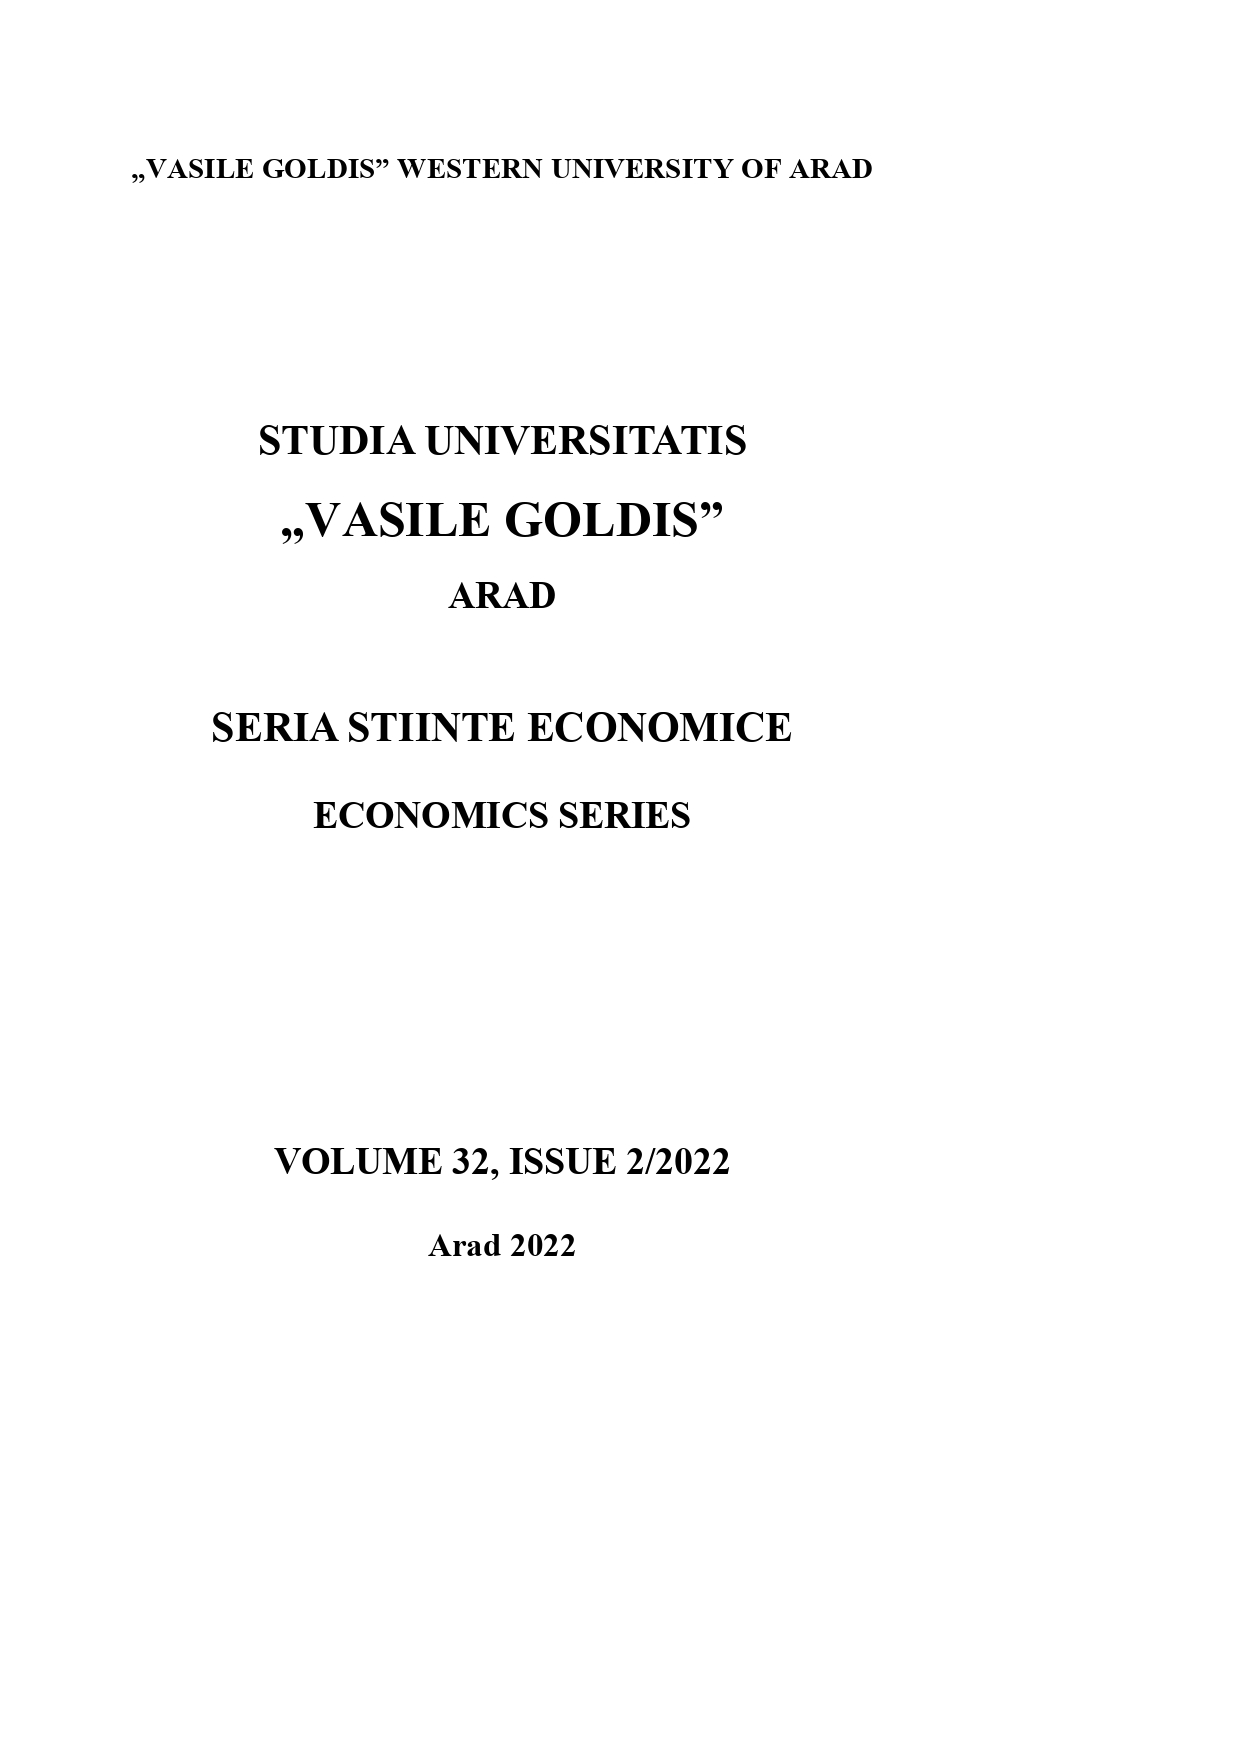 ANALYSIS OF THE BANKING SECTOR COMPETITION IN KOSOVO